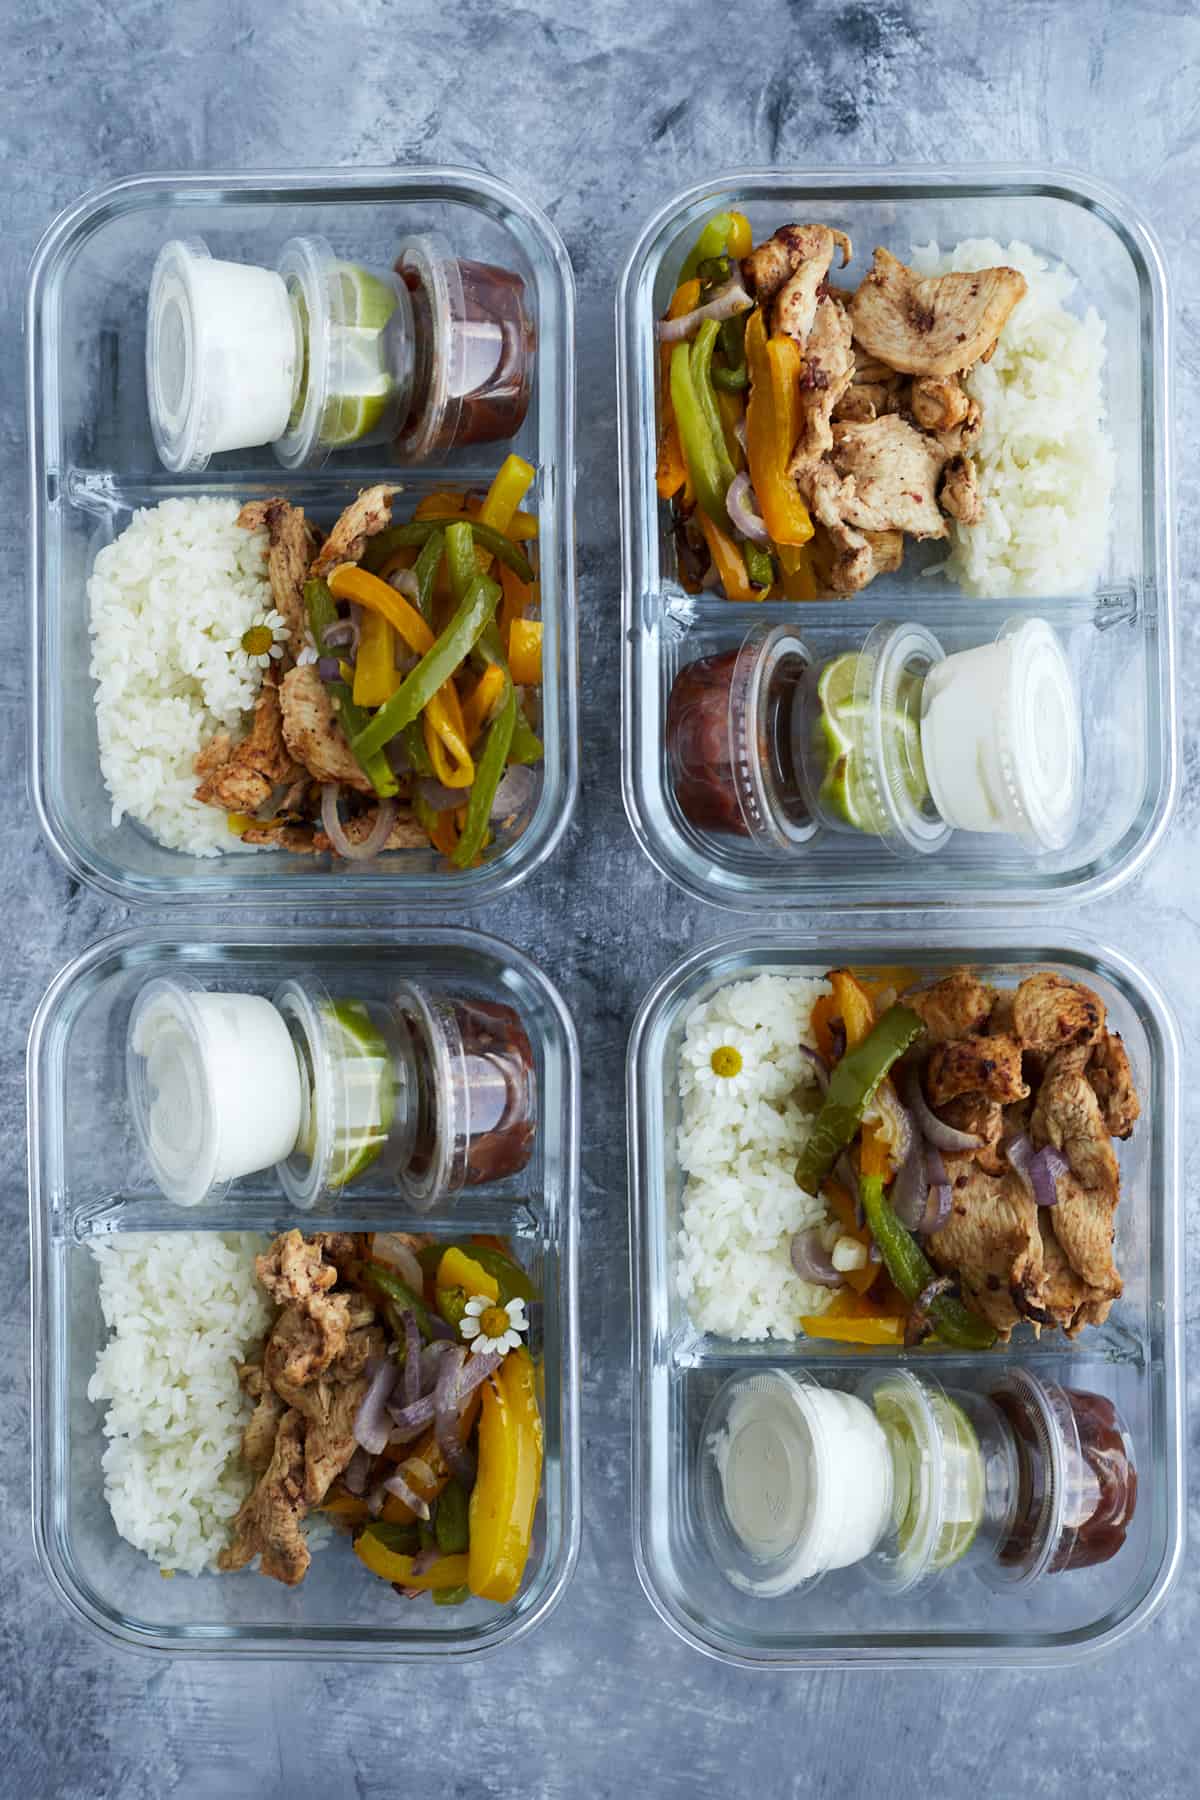 Meal-Prep Chili-Lime Chicken Bowls